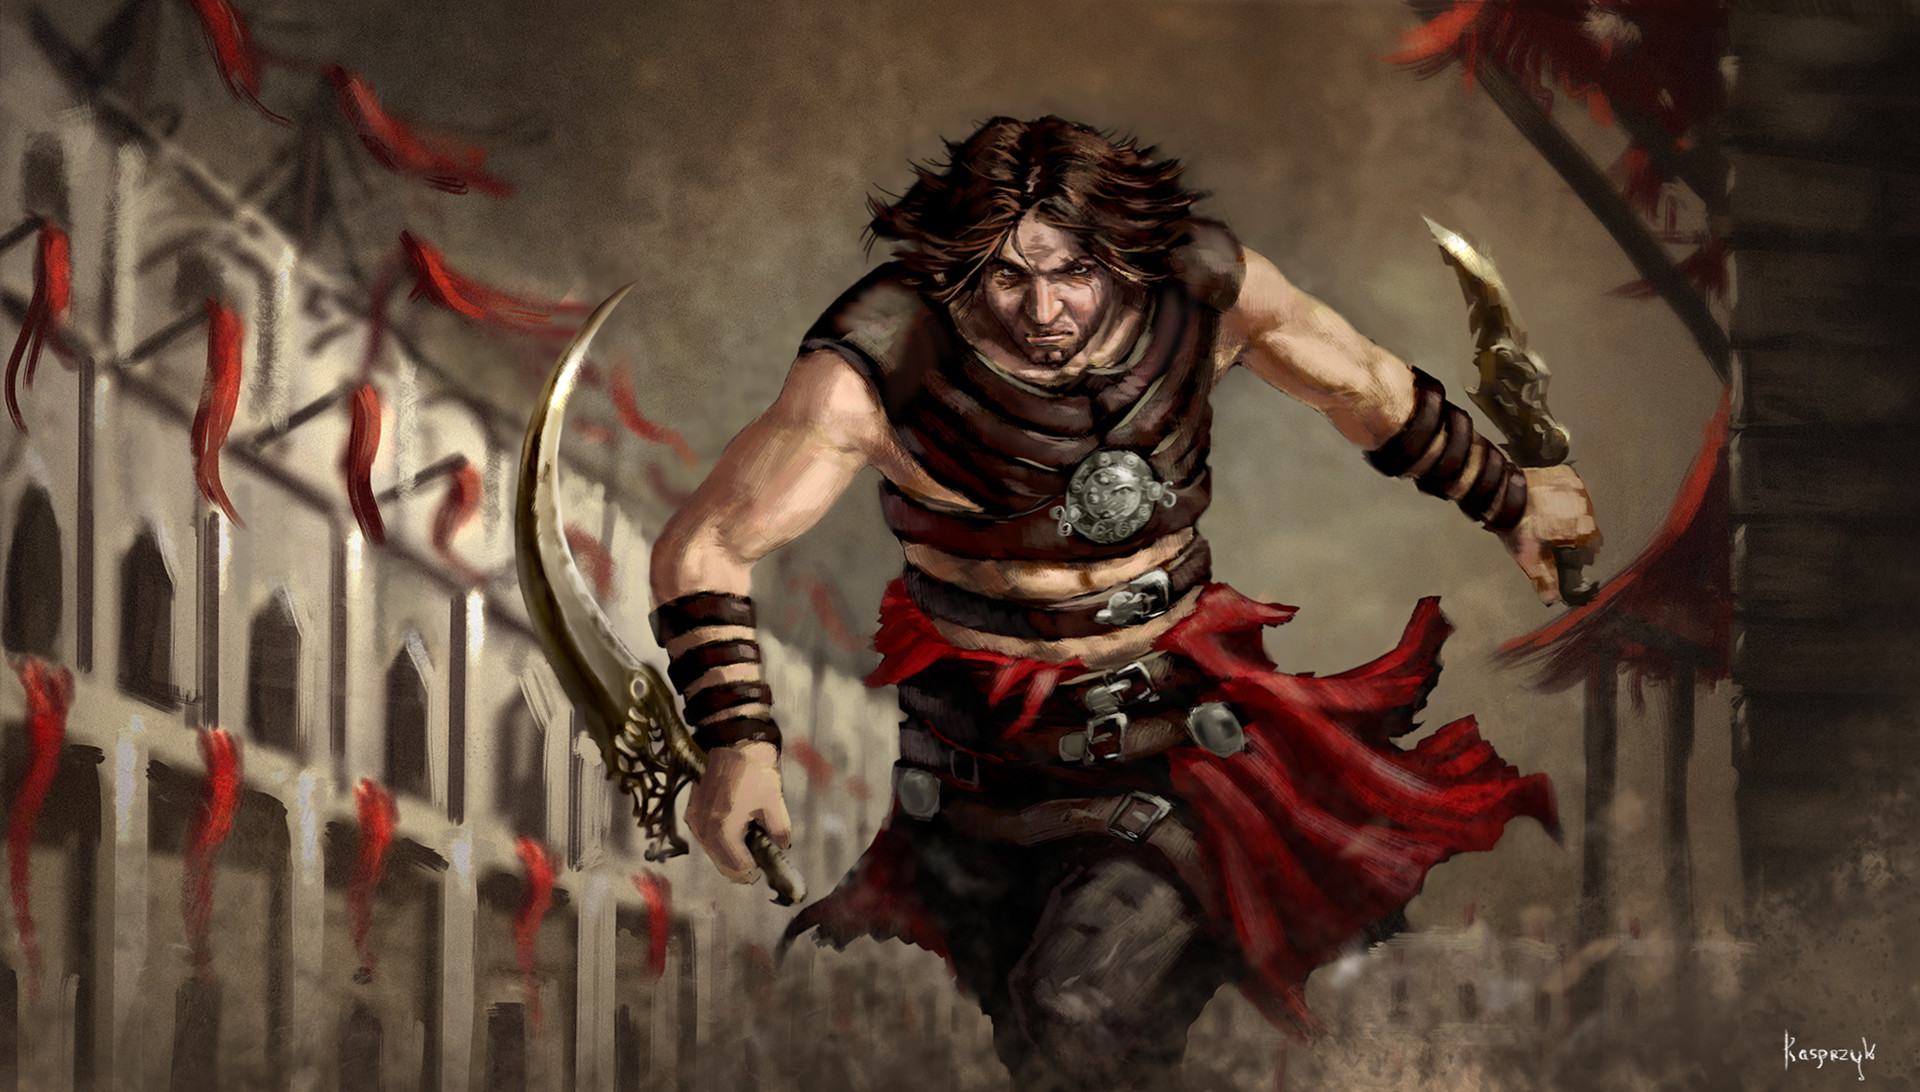 Prince of Persia: Warrior within. Prince of Persia Fan Art.